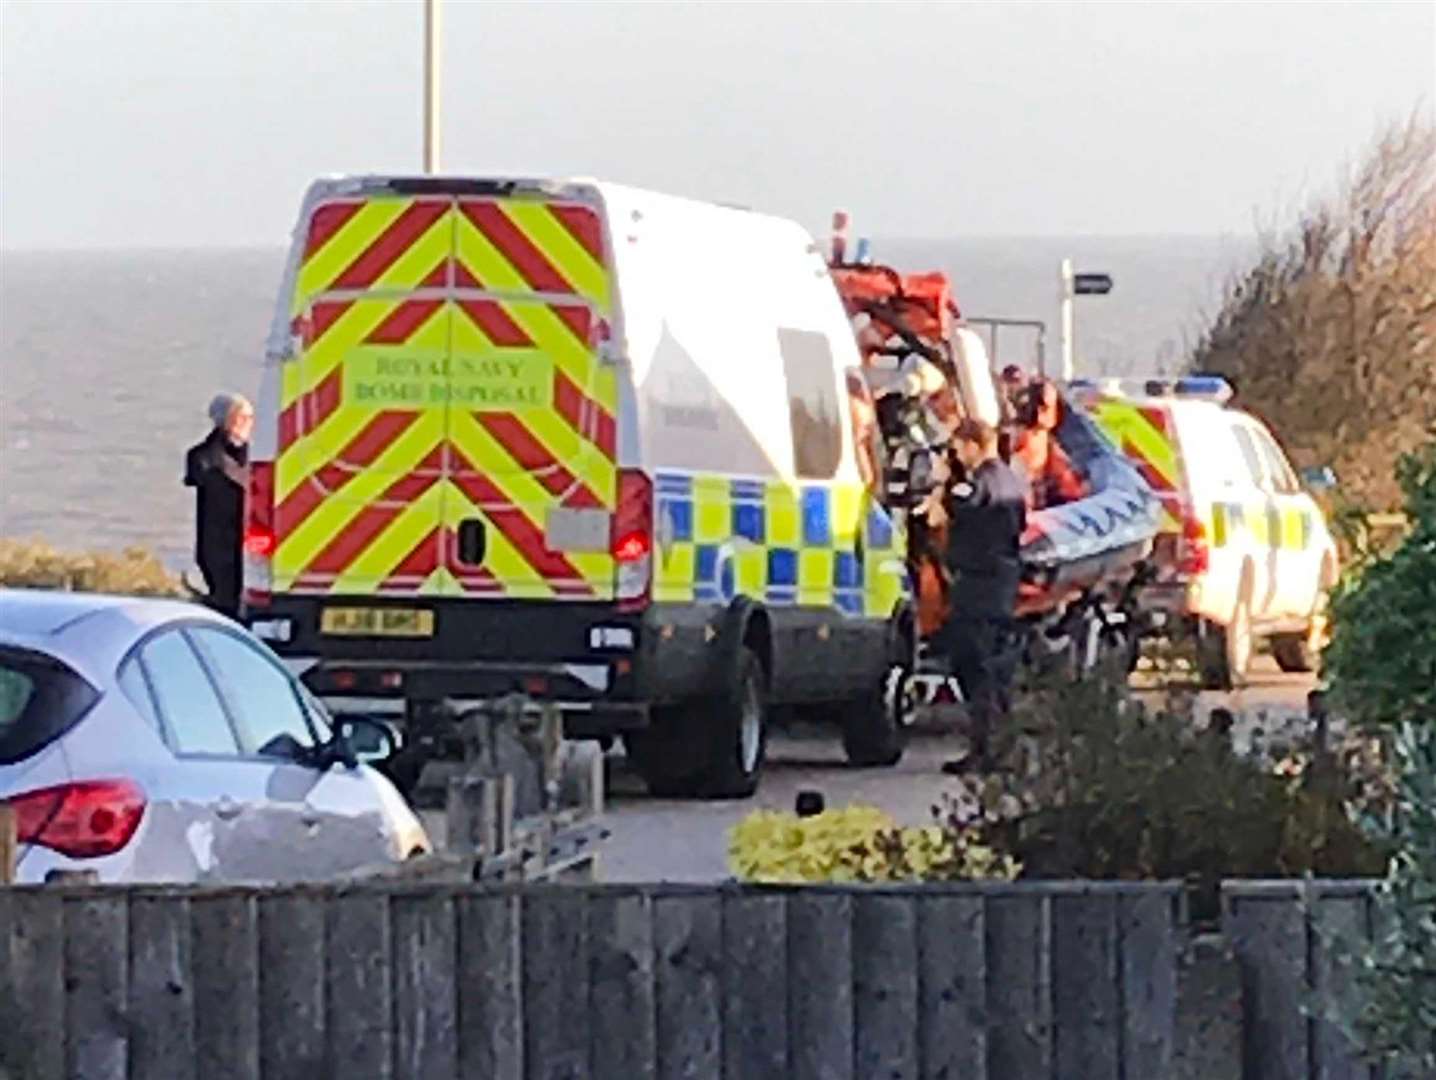 The bomb disposal unit was spotted in Bishopstone Glen